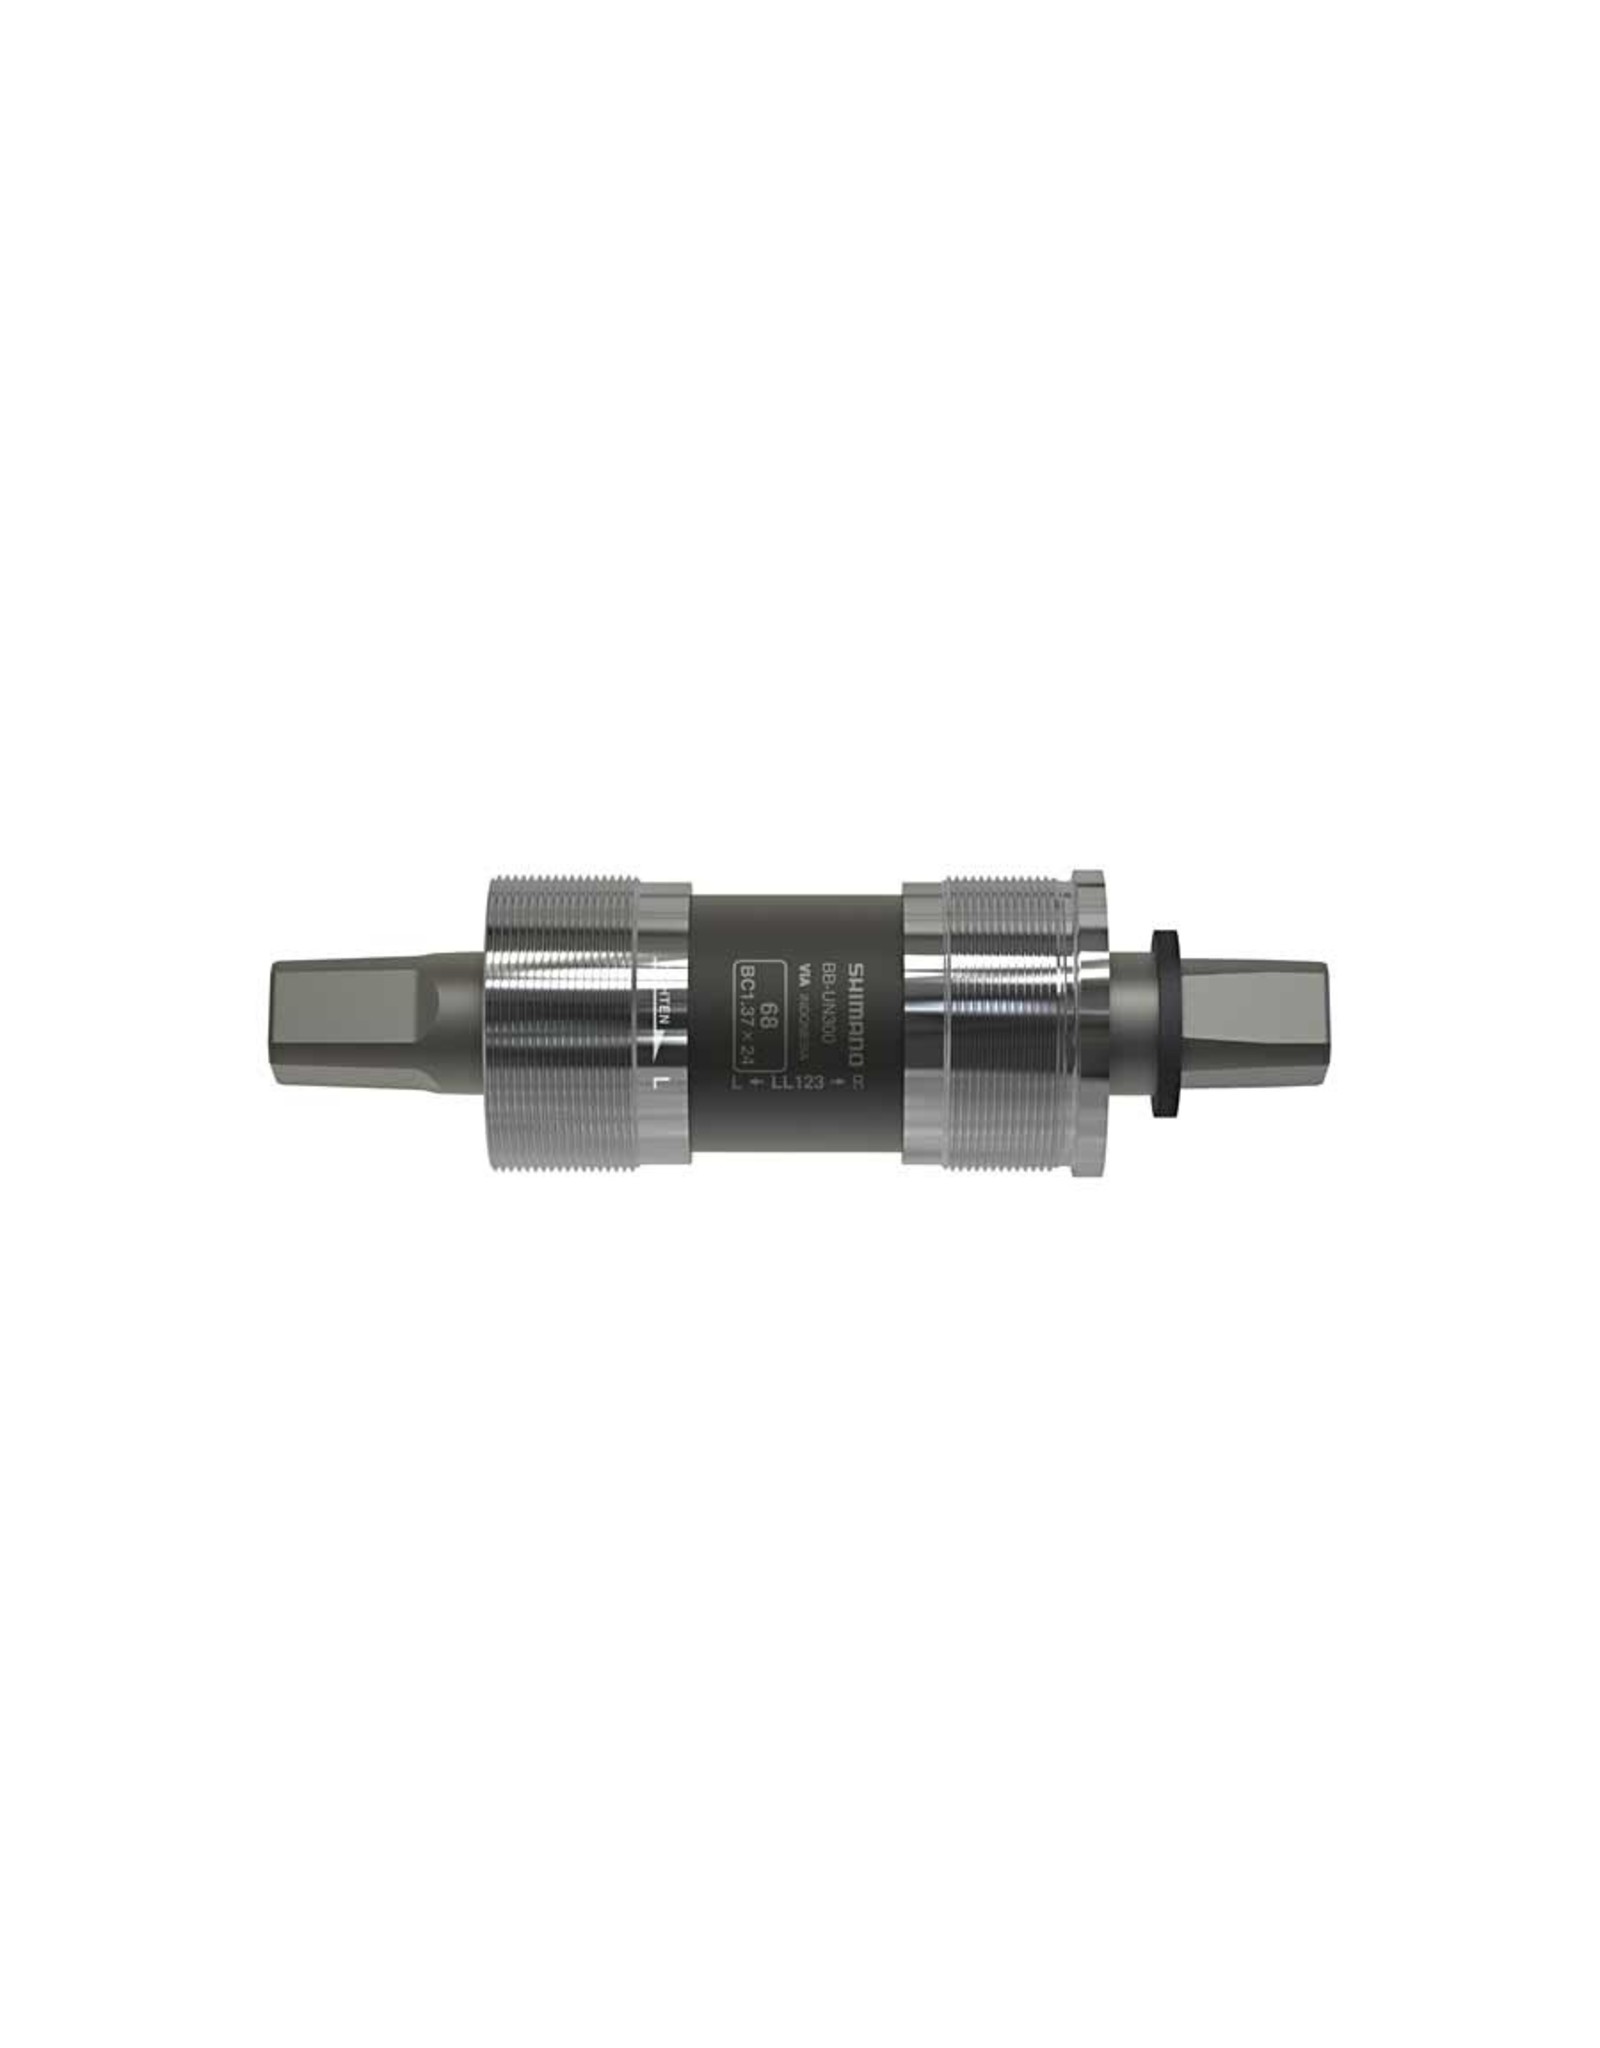 Shimano BOTTOM BRACKET, BB-UN300, SPINDLE SQUARE TYPE, SHELL:BSA